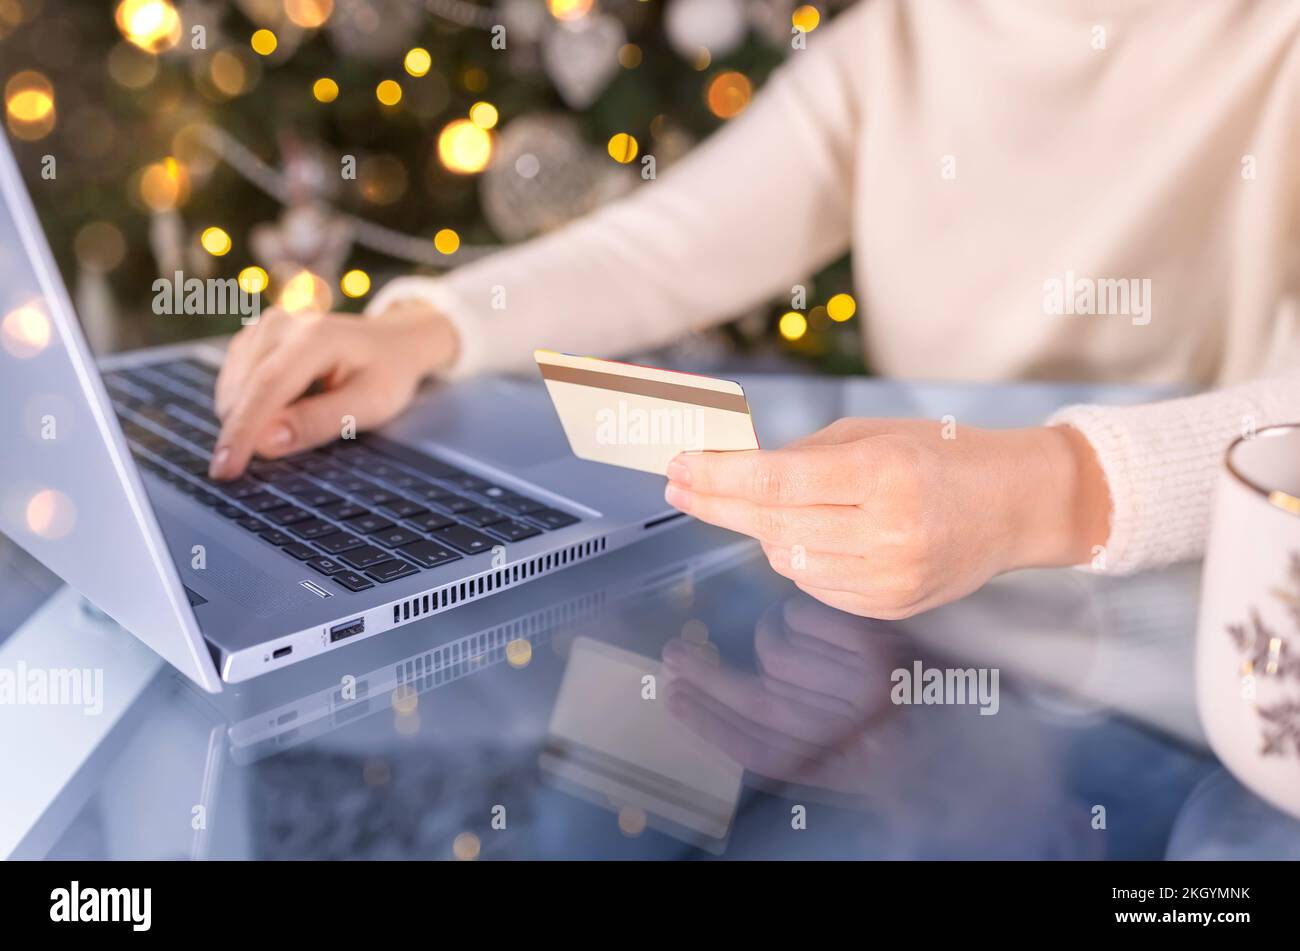 Cropped shot of female hands with golden credit card and laptop. Christmas presents, decorated tree on background. Woman shopping for holiday season p Stock Photo